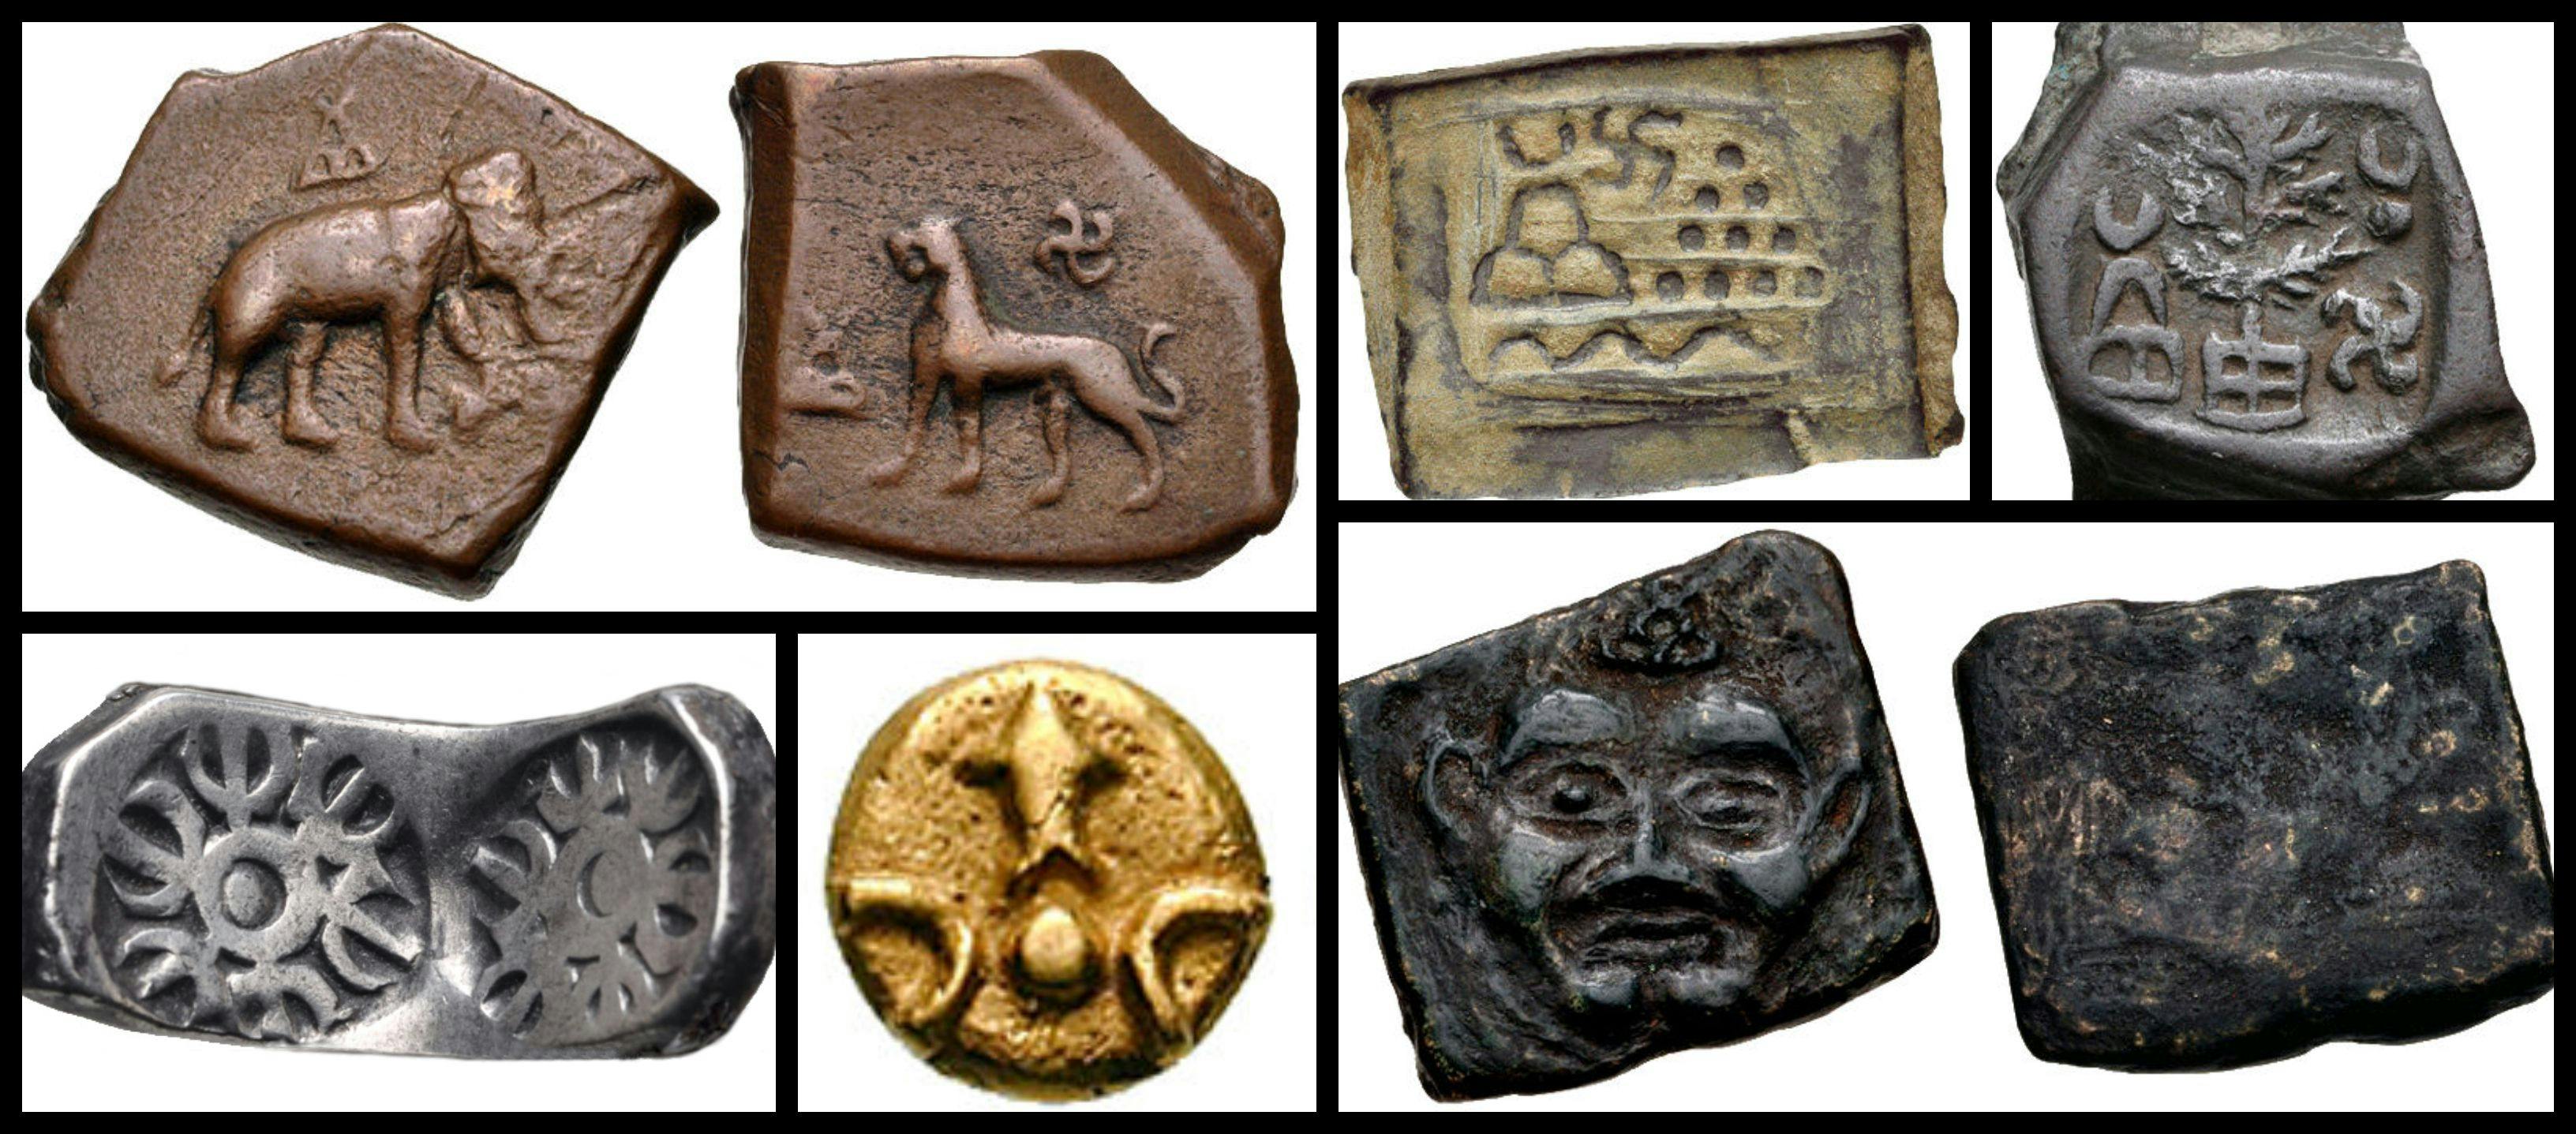 Coins unearthed from Taxila